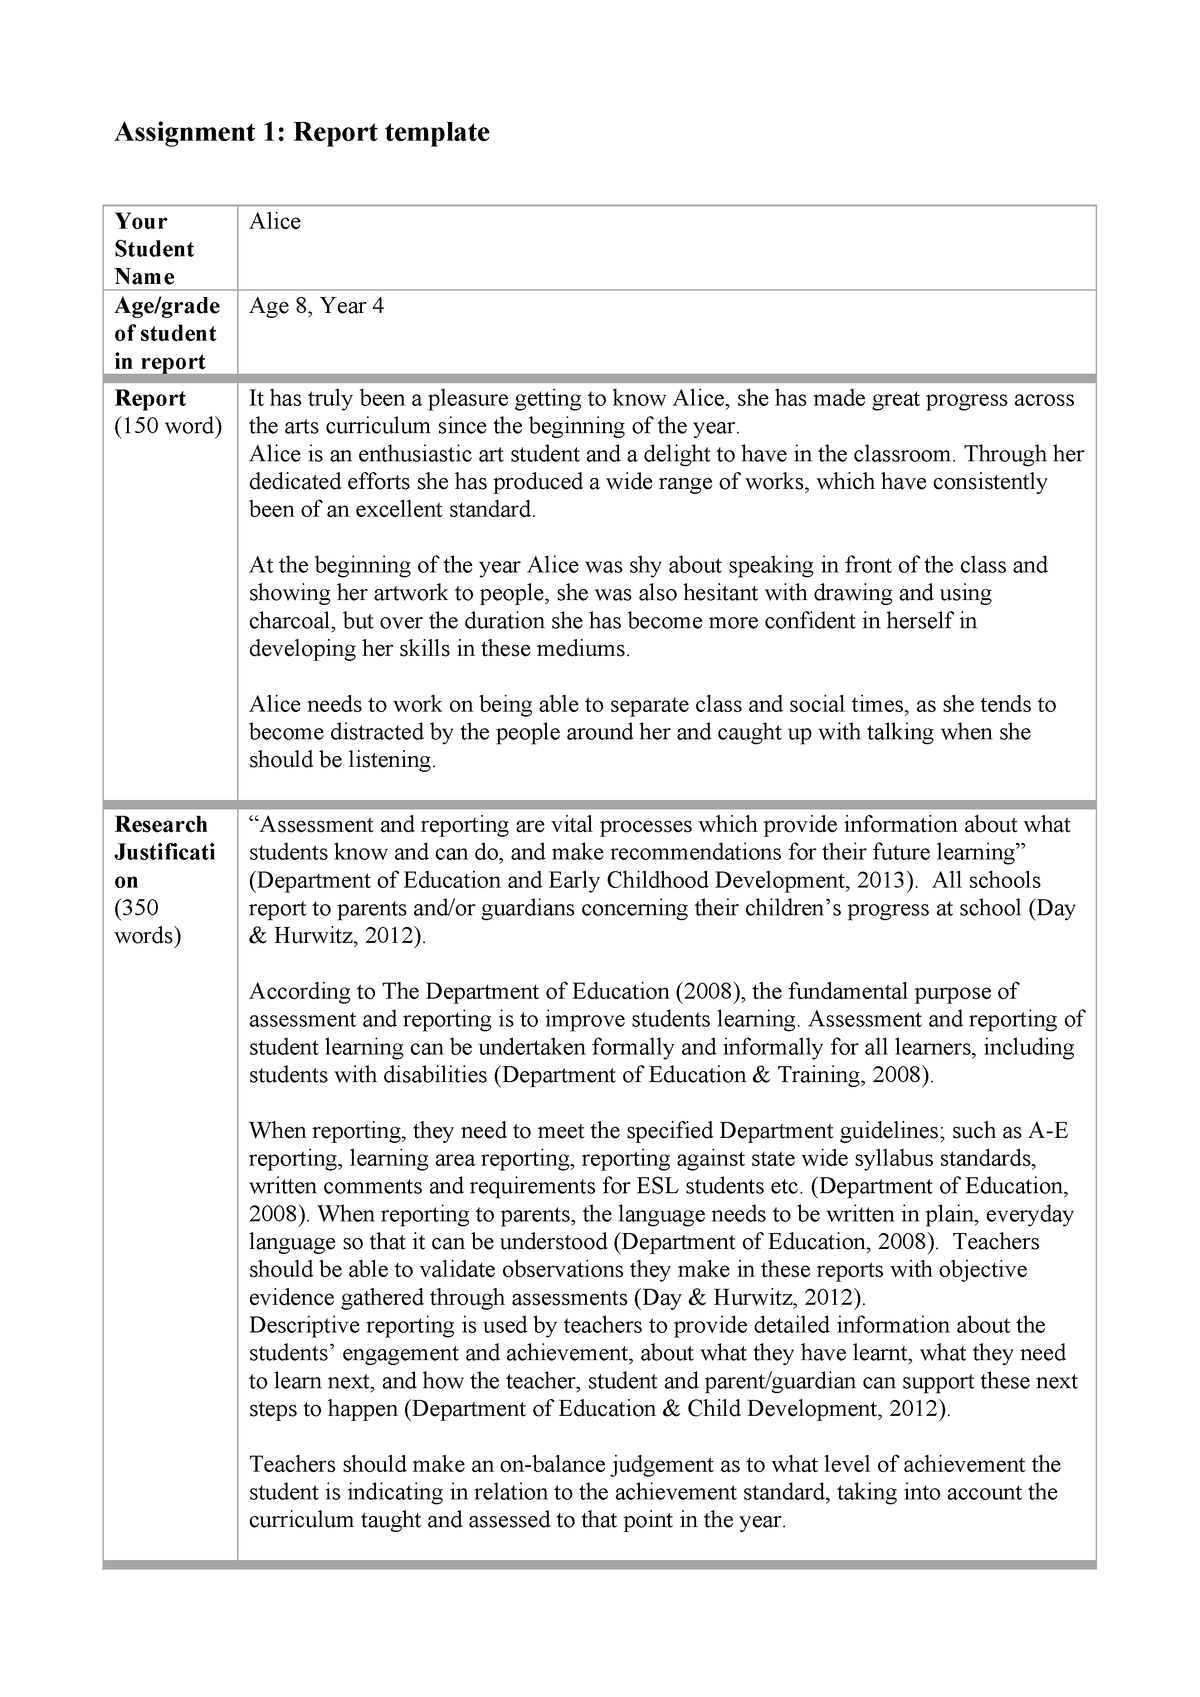 Report Template – Assignment – 6890 Arts Education 2 – Uc In Assignment Report Template